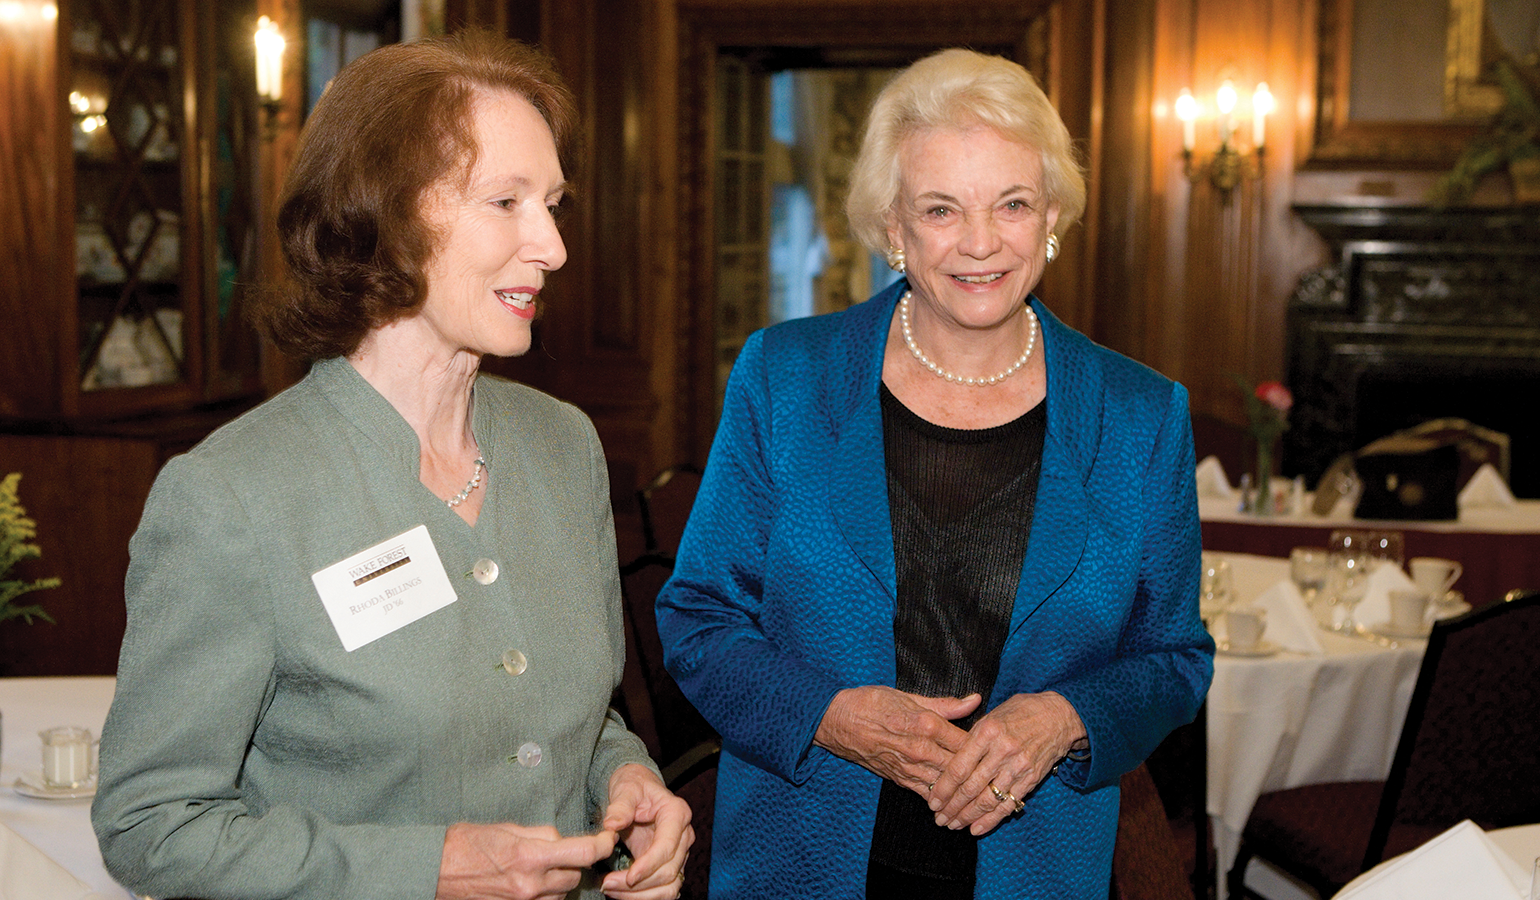 Justice Sandra Day O’Connor, left, visited Wake Forest Law beginning in 1993. She is pictured with Rhoda Billings (LLB ’66) in 2006.